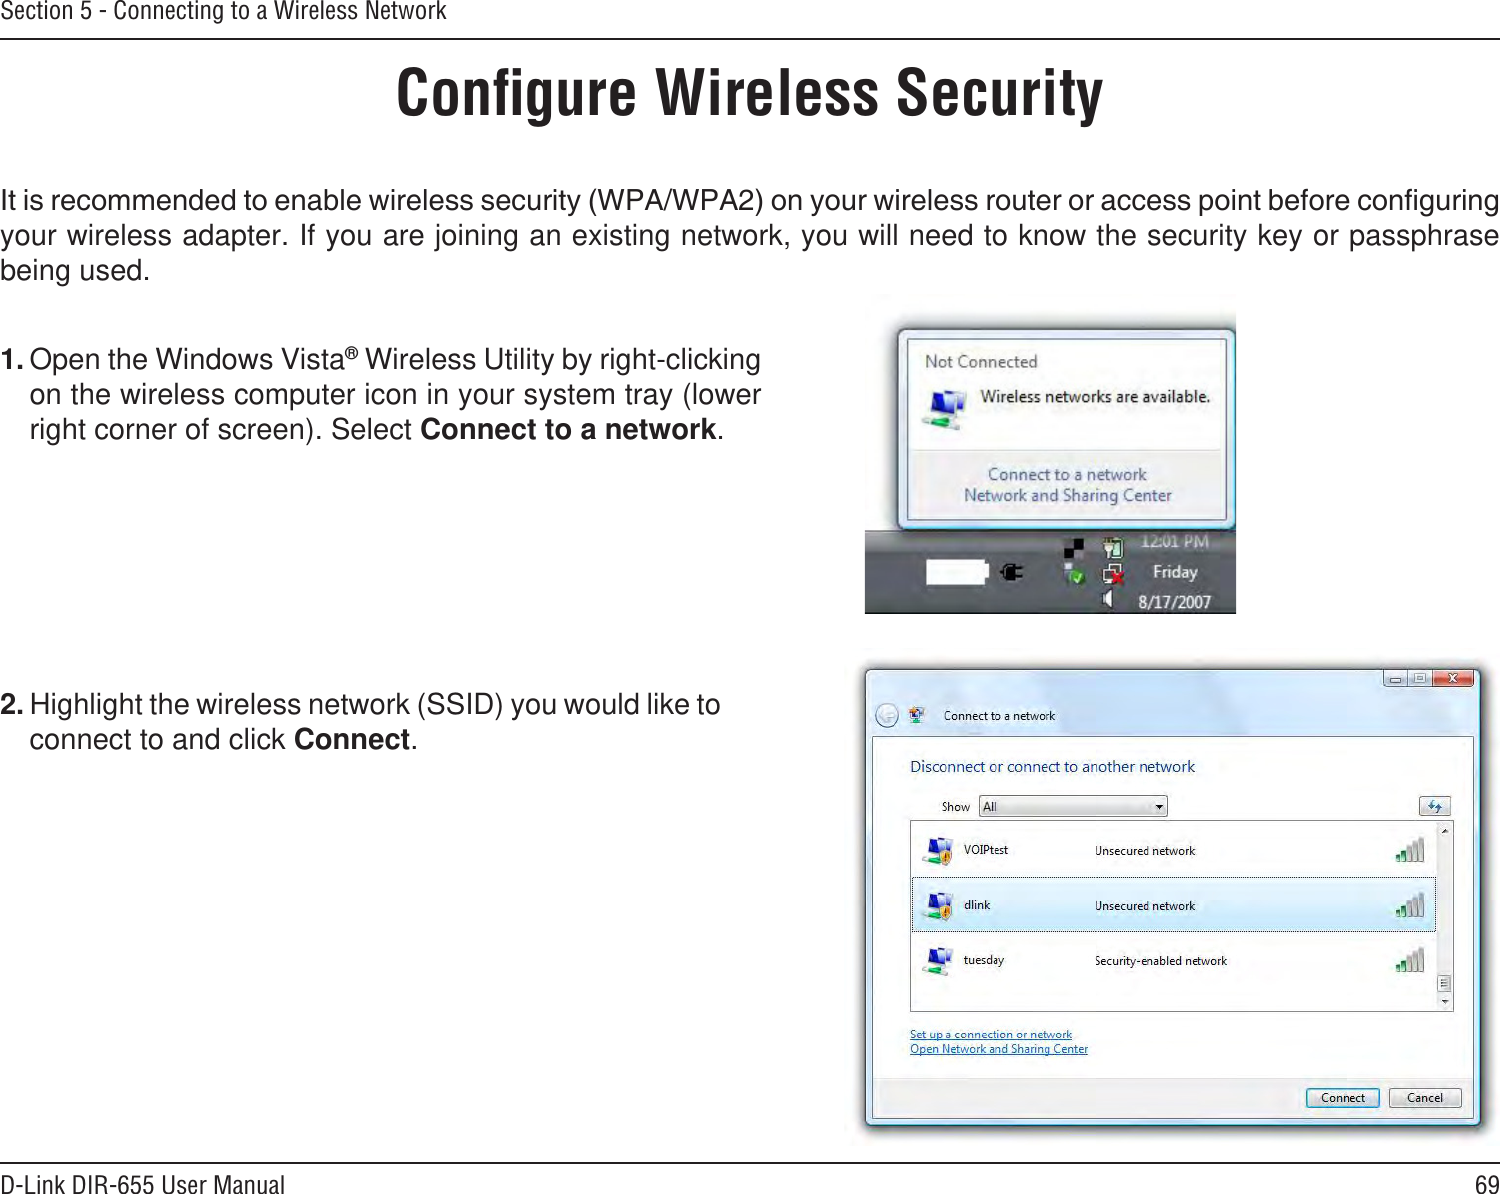 69D-Link DIR-655 User ManualSection 5 - Connecting to a Wireless NetworkConﬁgure Wireless Securityyour wireless adapter. If you are joining an existing network, you will need to know the security key or passphrase being used.2. Highlight the wireless network (SSID) you would like to connect to and click Connect.1. Open the Windows Vista® Wireless Utility by right-clicking on the wireless computer icon in your system tray (lower right corner of screen). Select Connect to a network. 